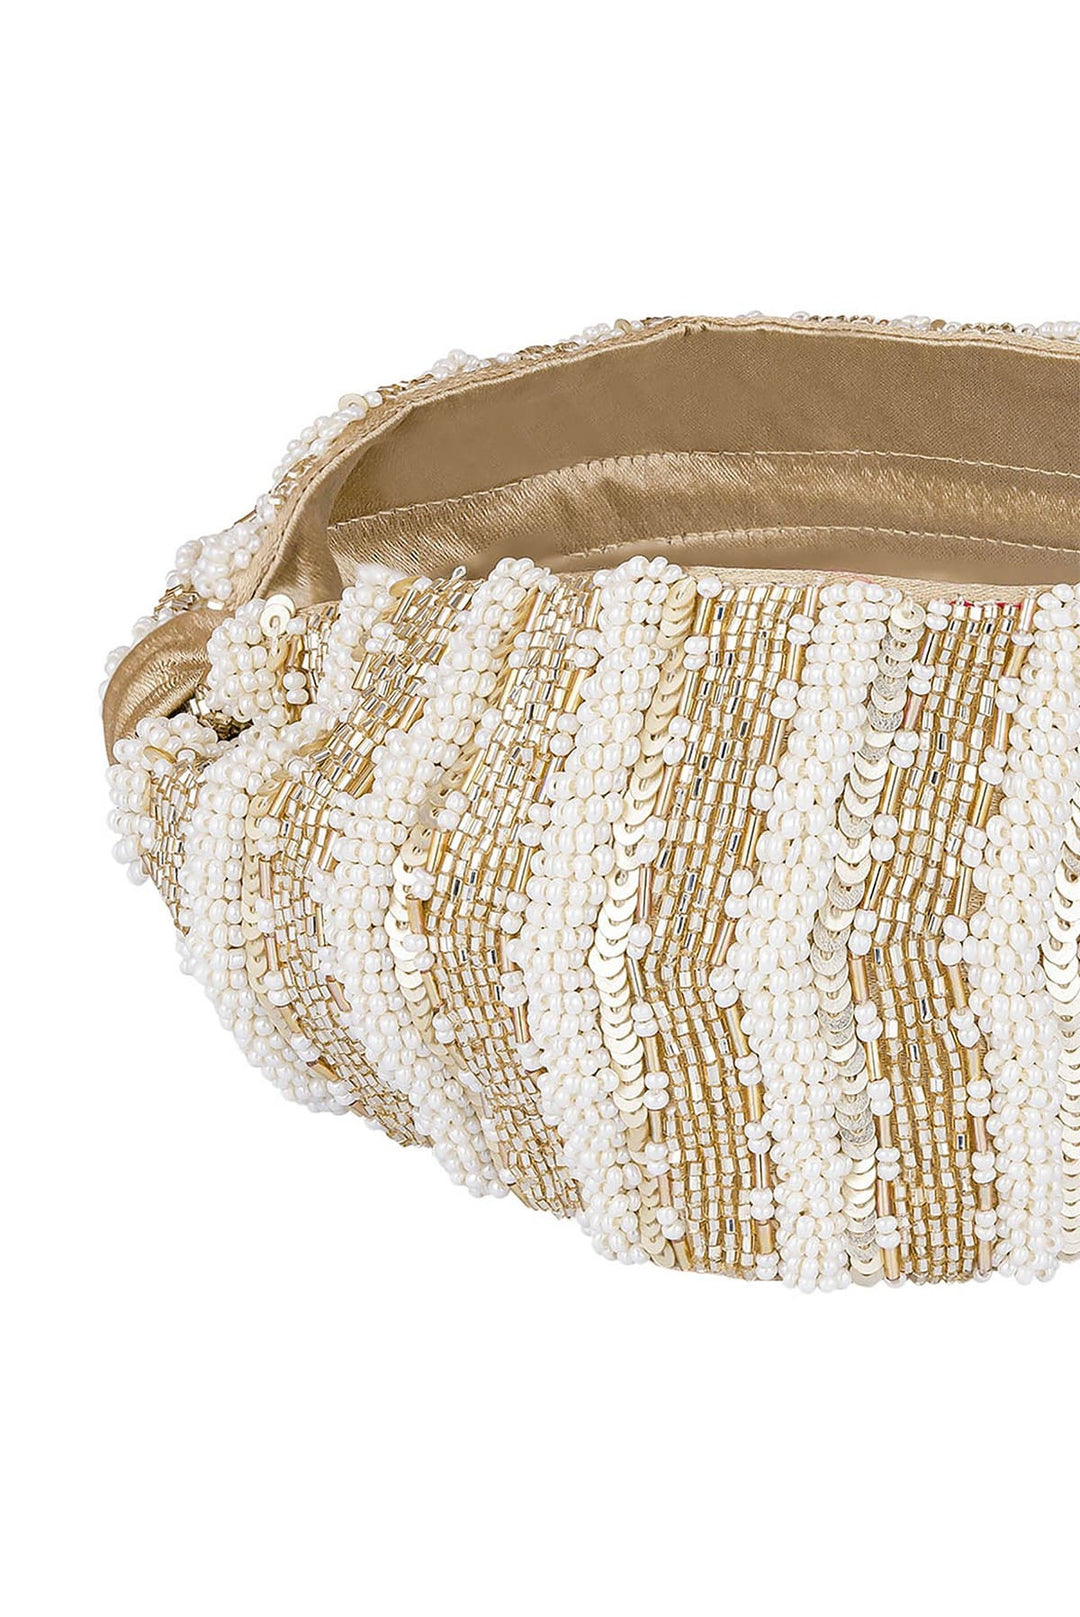 Irina Knotted Hair Band - White & Gold